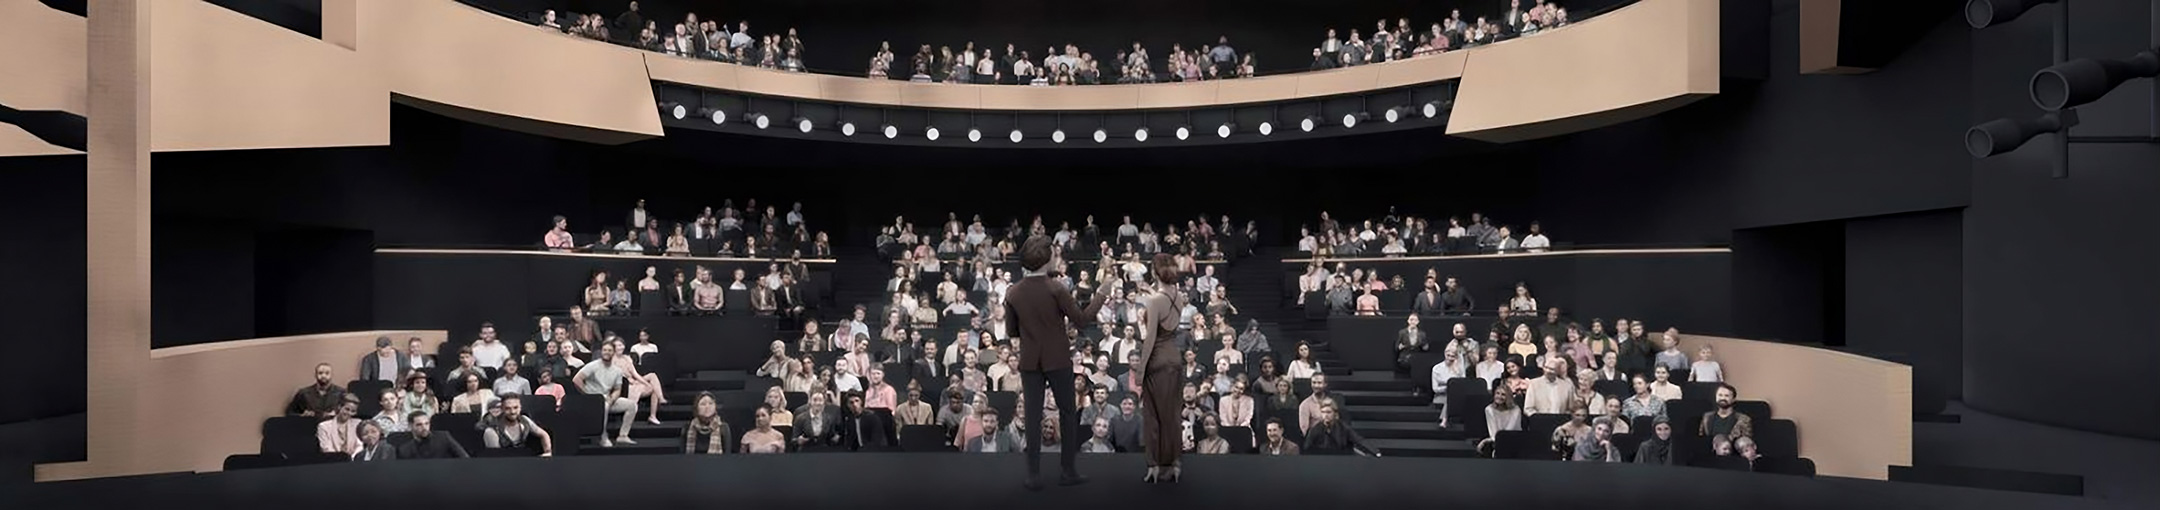 Rendering of a theater with people in balcony seating.